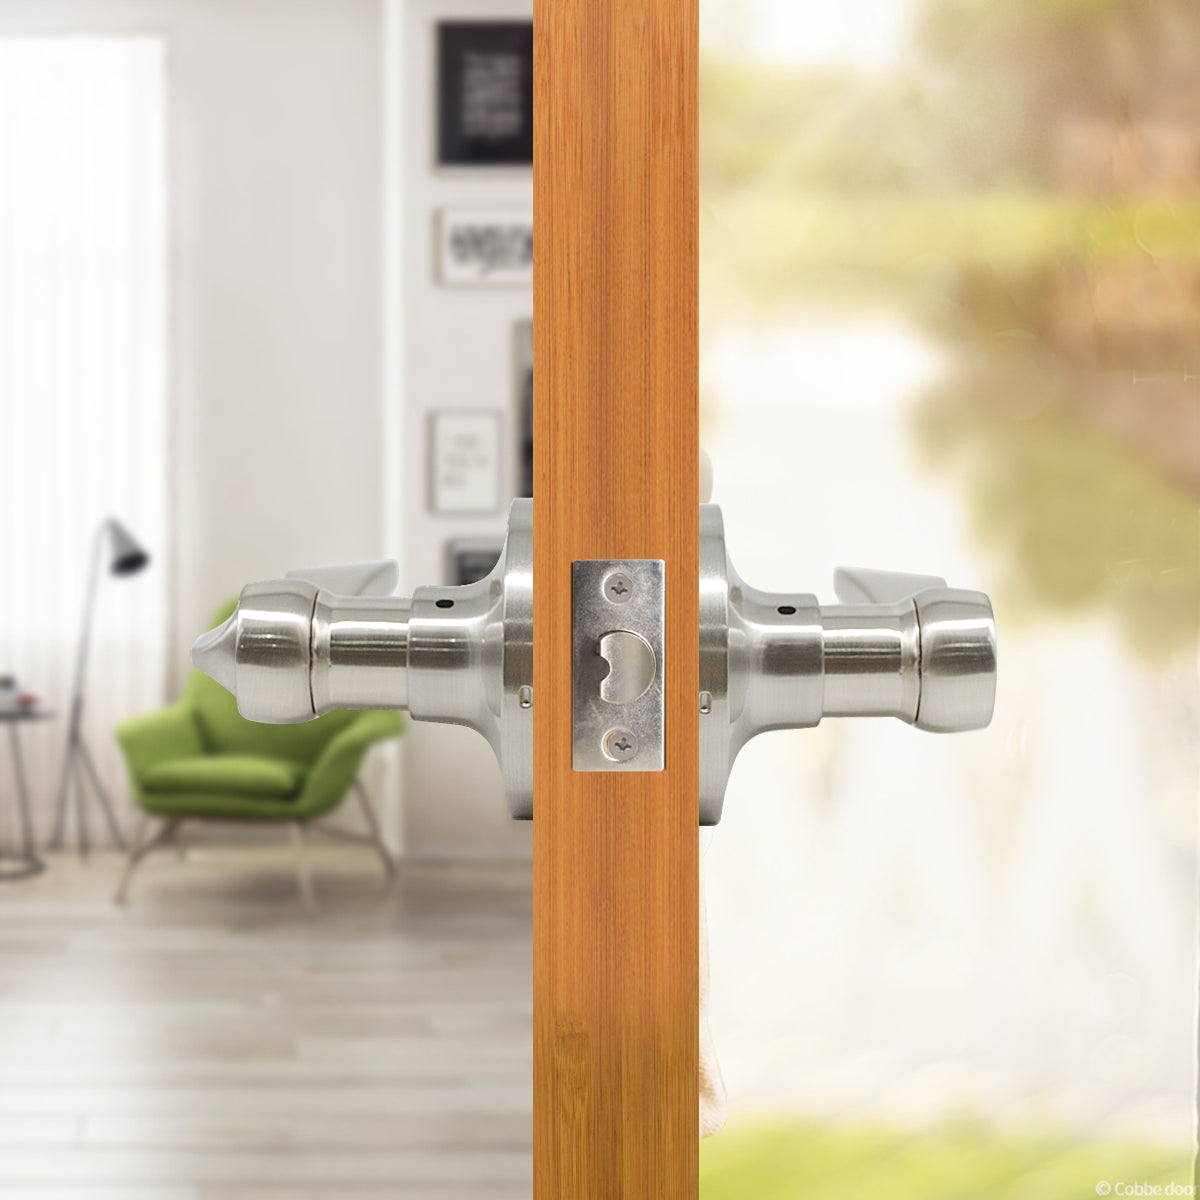 Privacy Door Lever set Brushed Nickel Finish with Wave Handle Style DL12061SNBK - Probrico